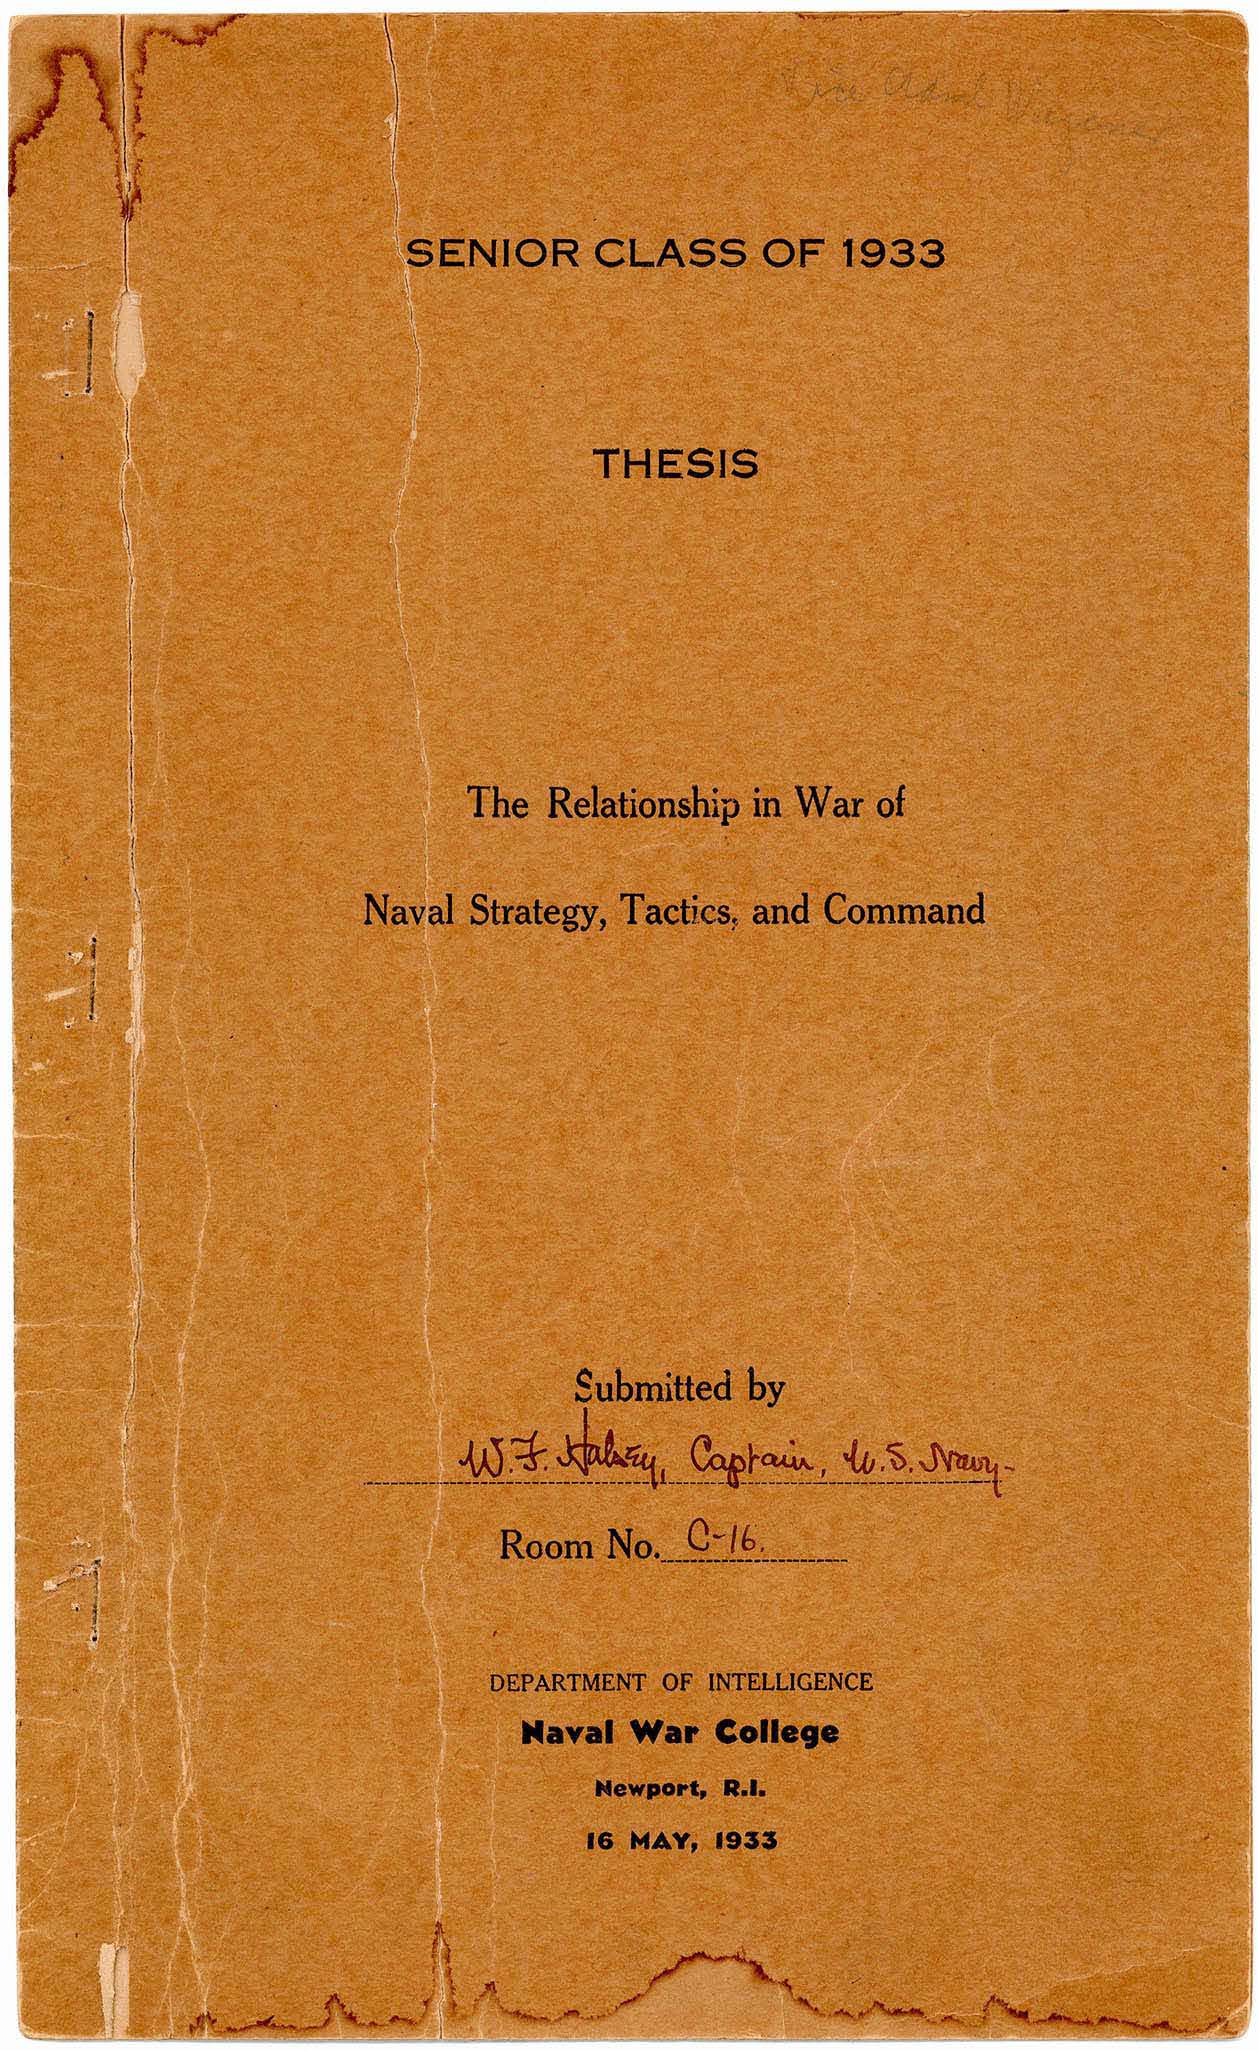 Relationship in War of Naval Strategy, Tactics and Command, W.F. Halsey